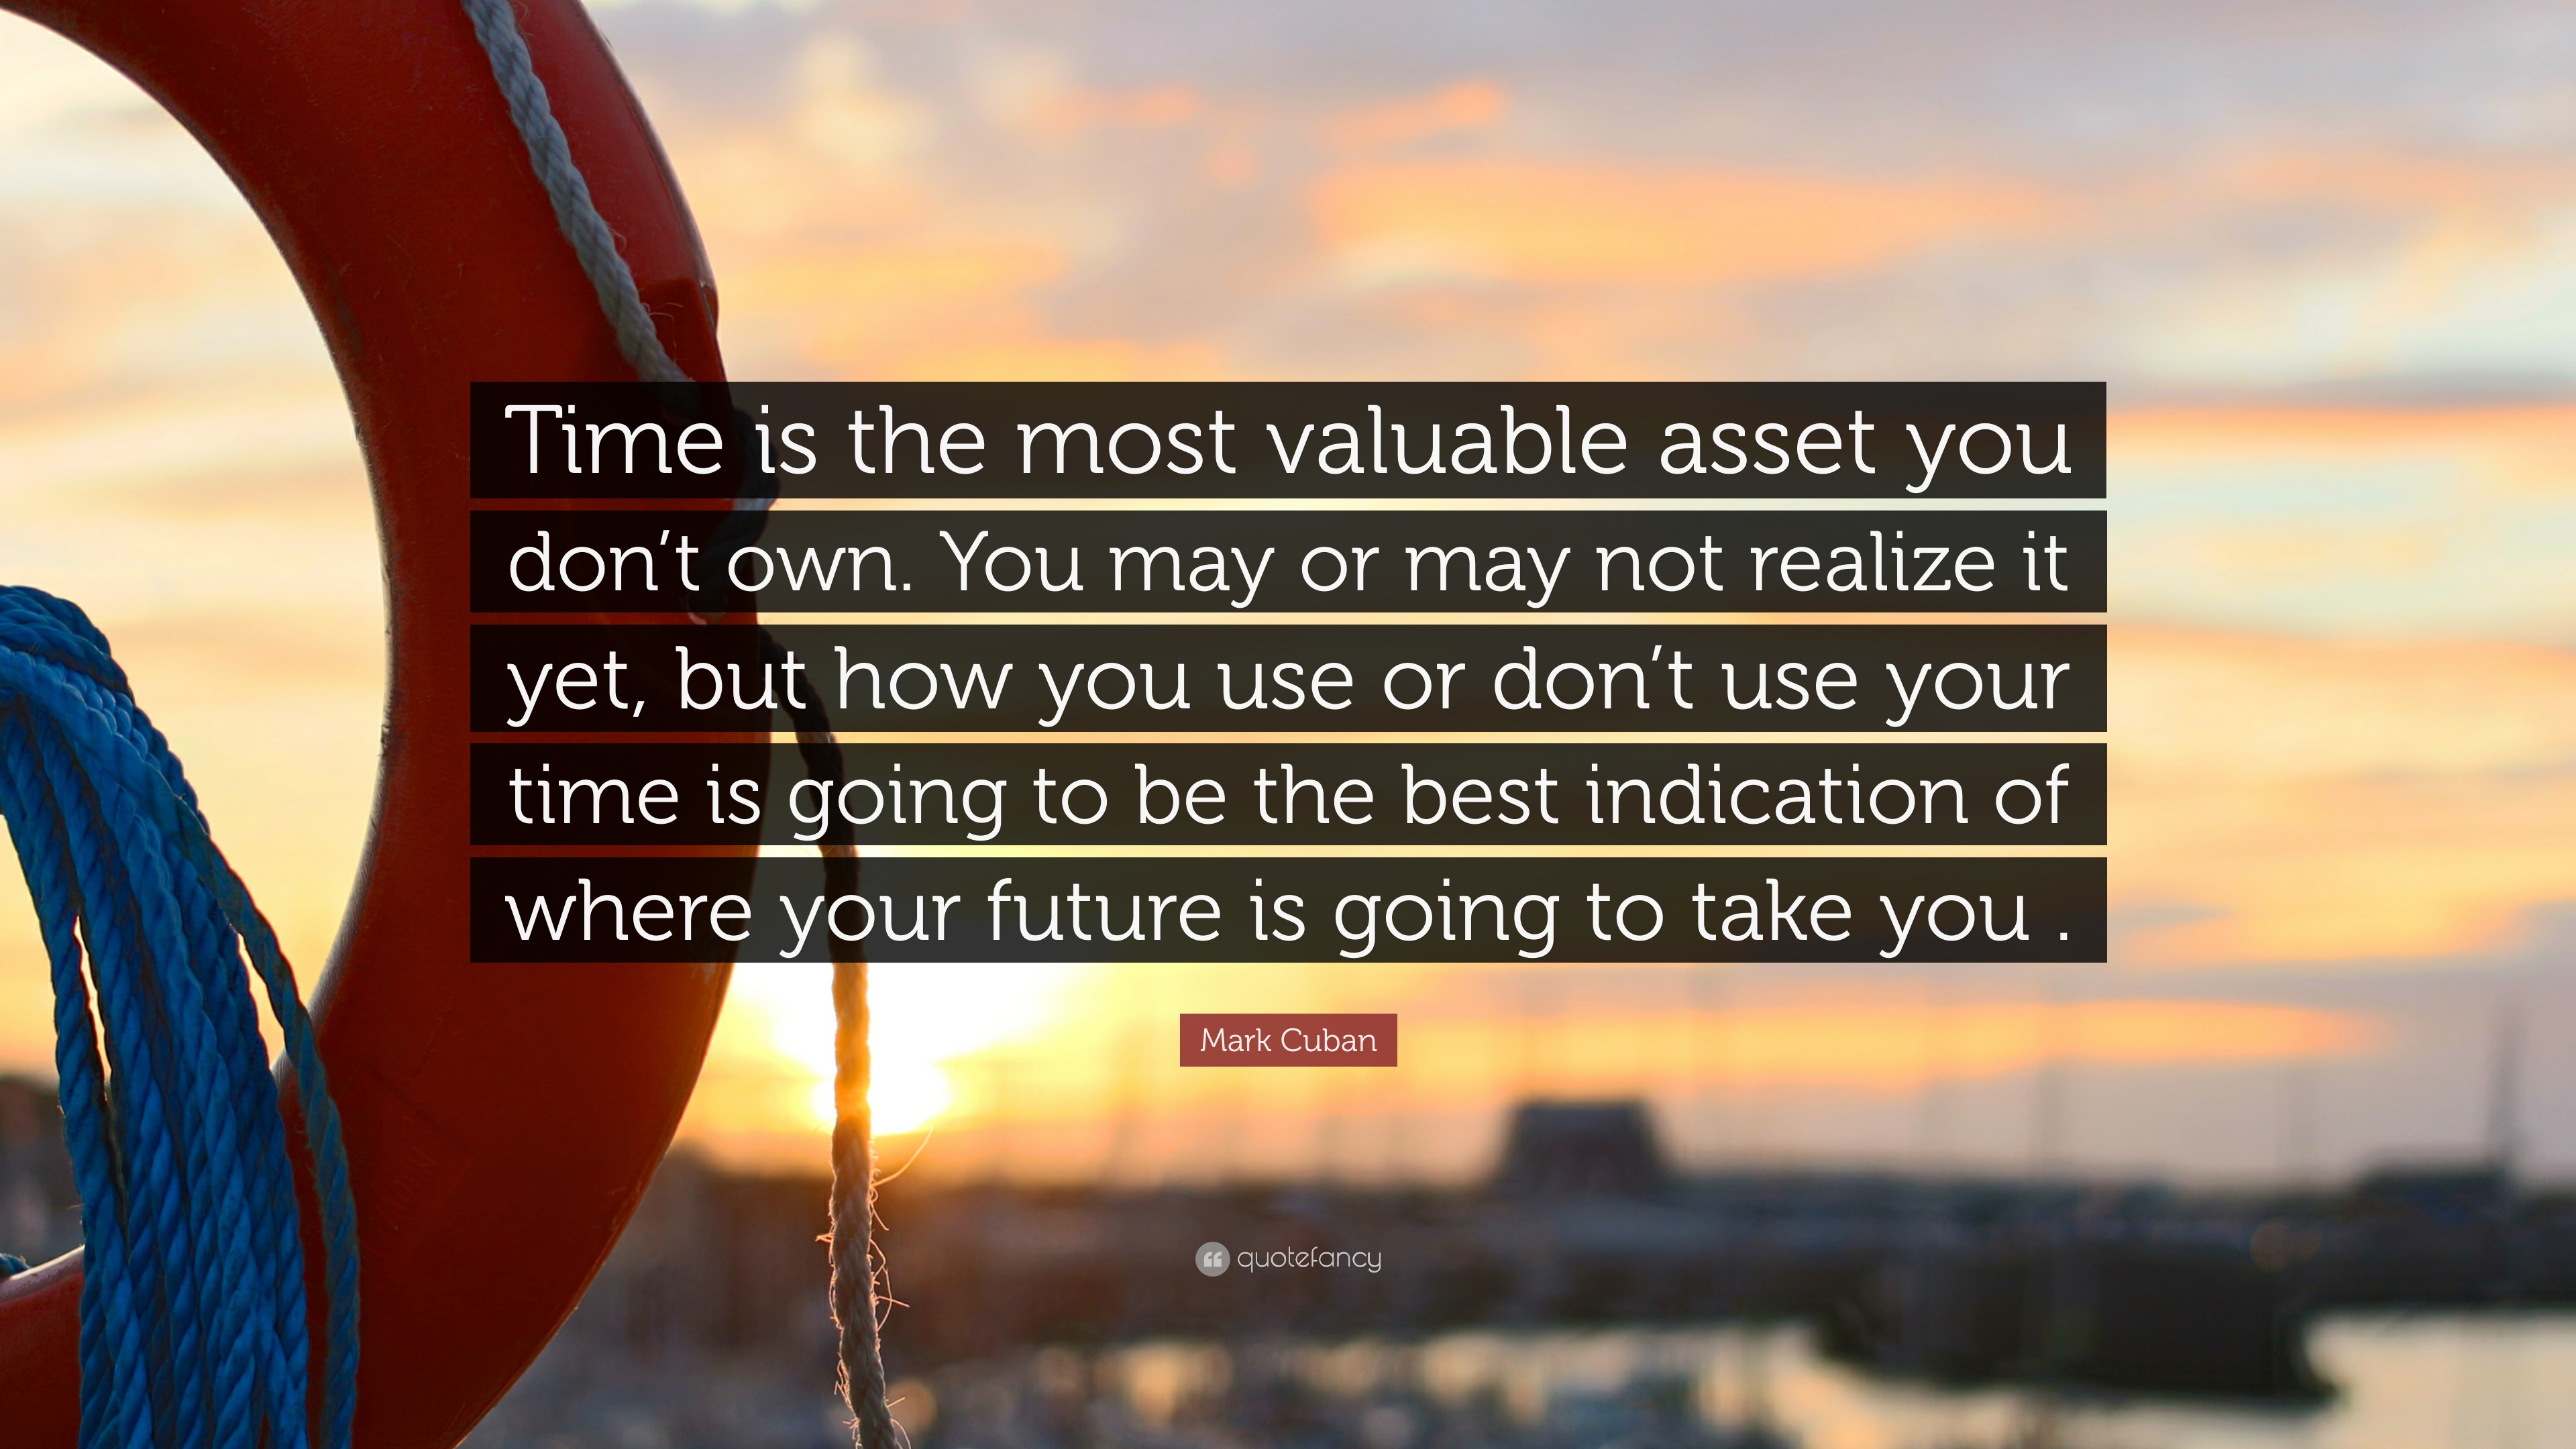 Mark Cuban Quote: “Time is the most valuable asset you don't own. You may  or may not realize it yet, but how you use or don't use your time”